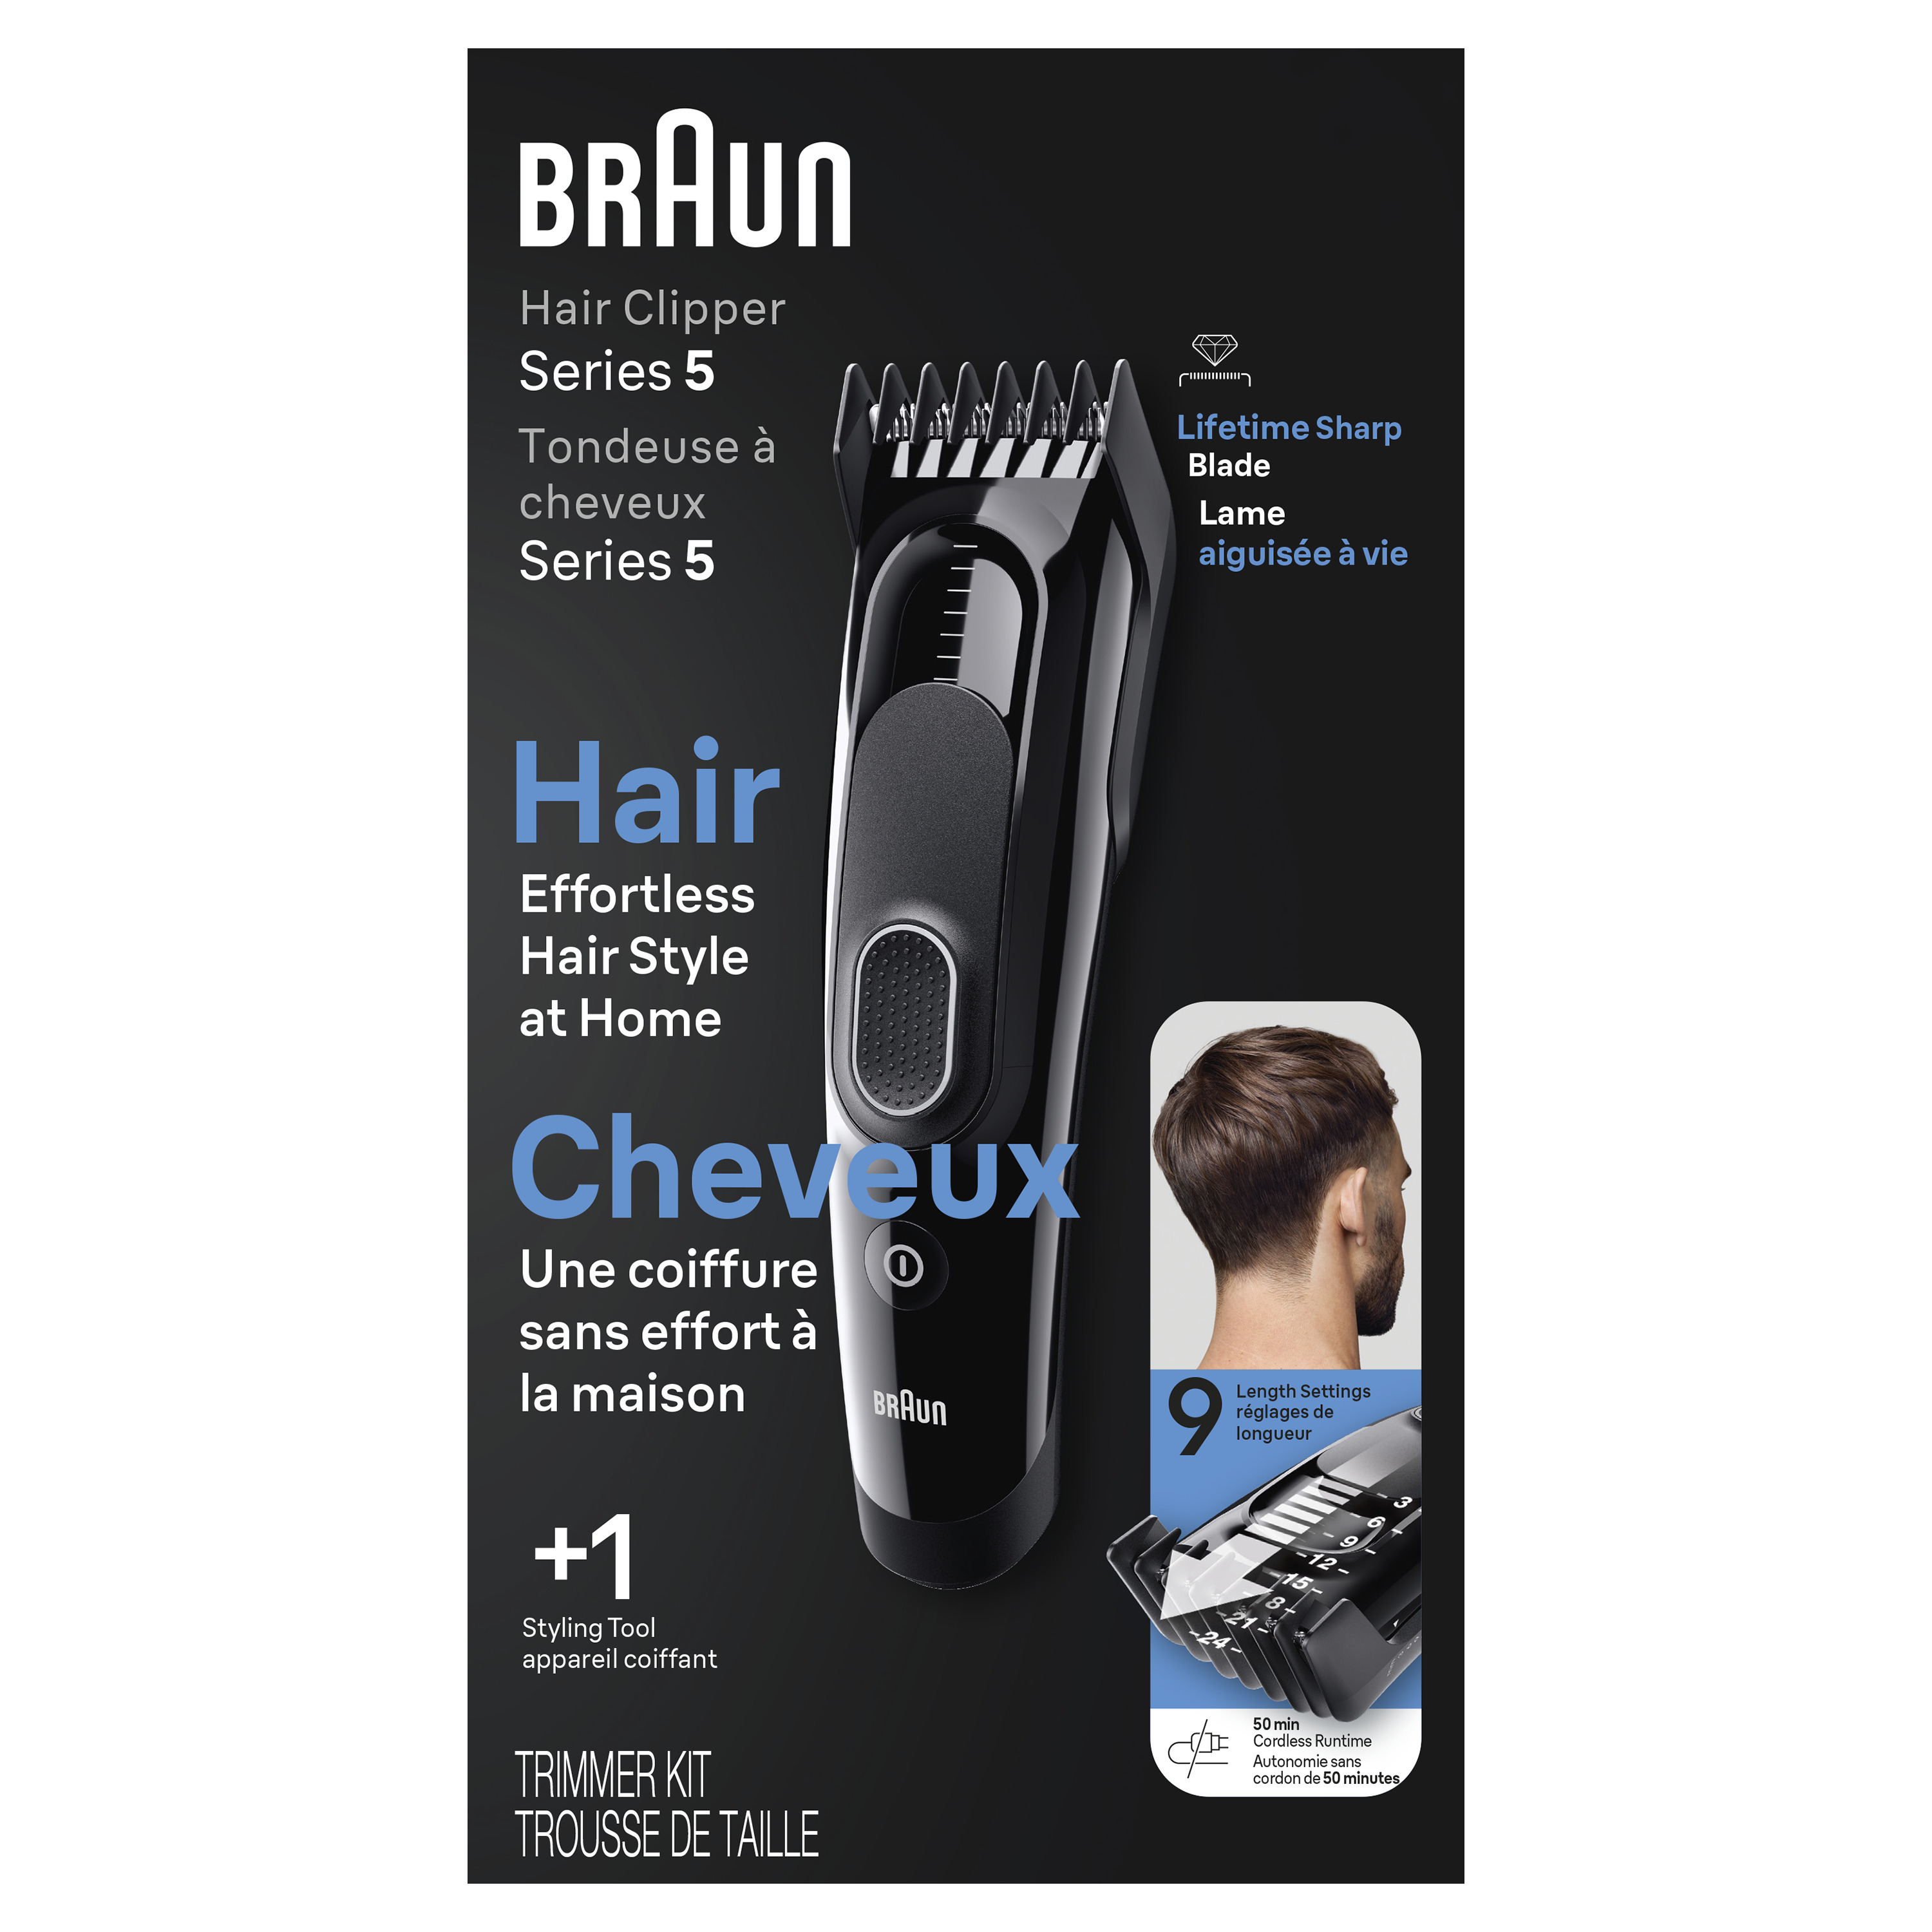 stand out sexual Hunger braun series hair clipper Advance cough Slippery